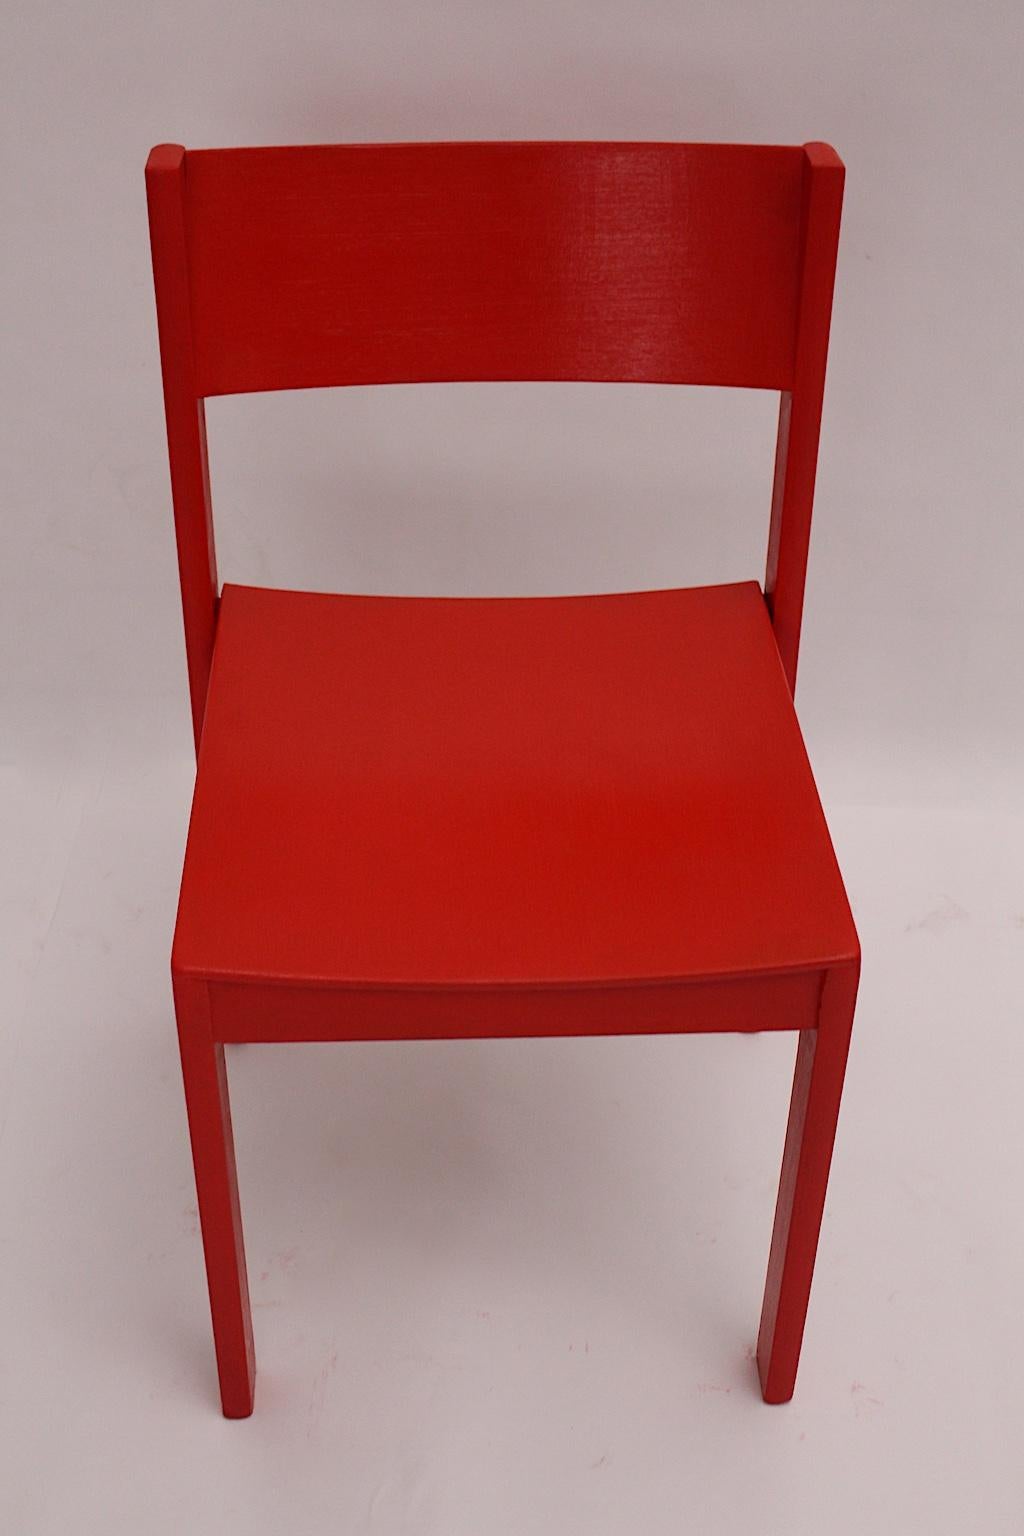 Mid-Century Modern Vintage Red Beech Dining Room Chairs 1950s Vienna Austria For Sale 8